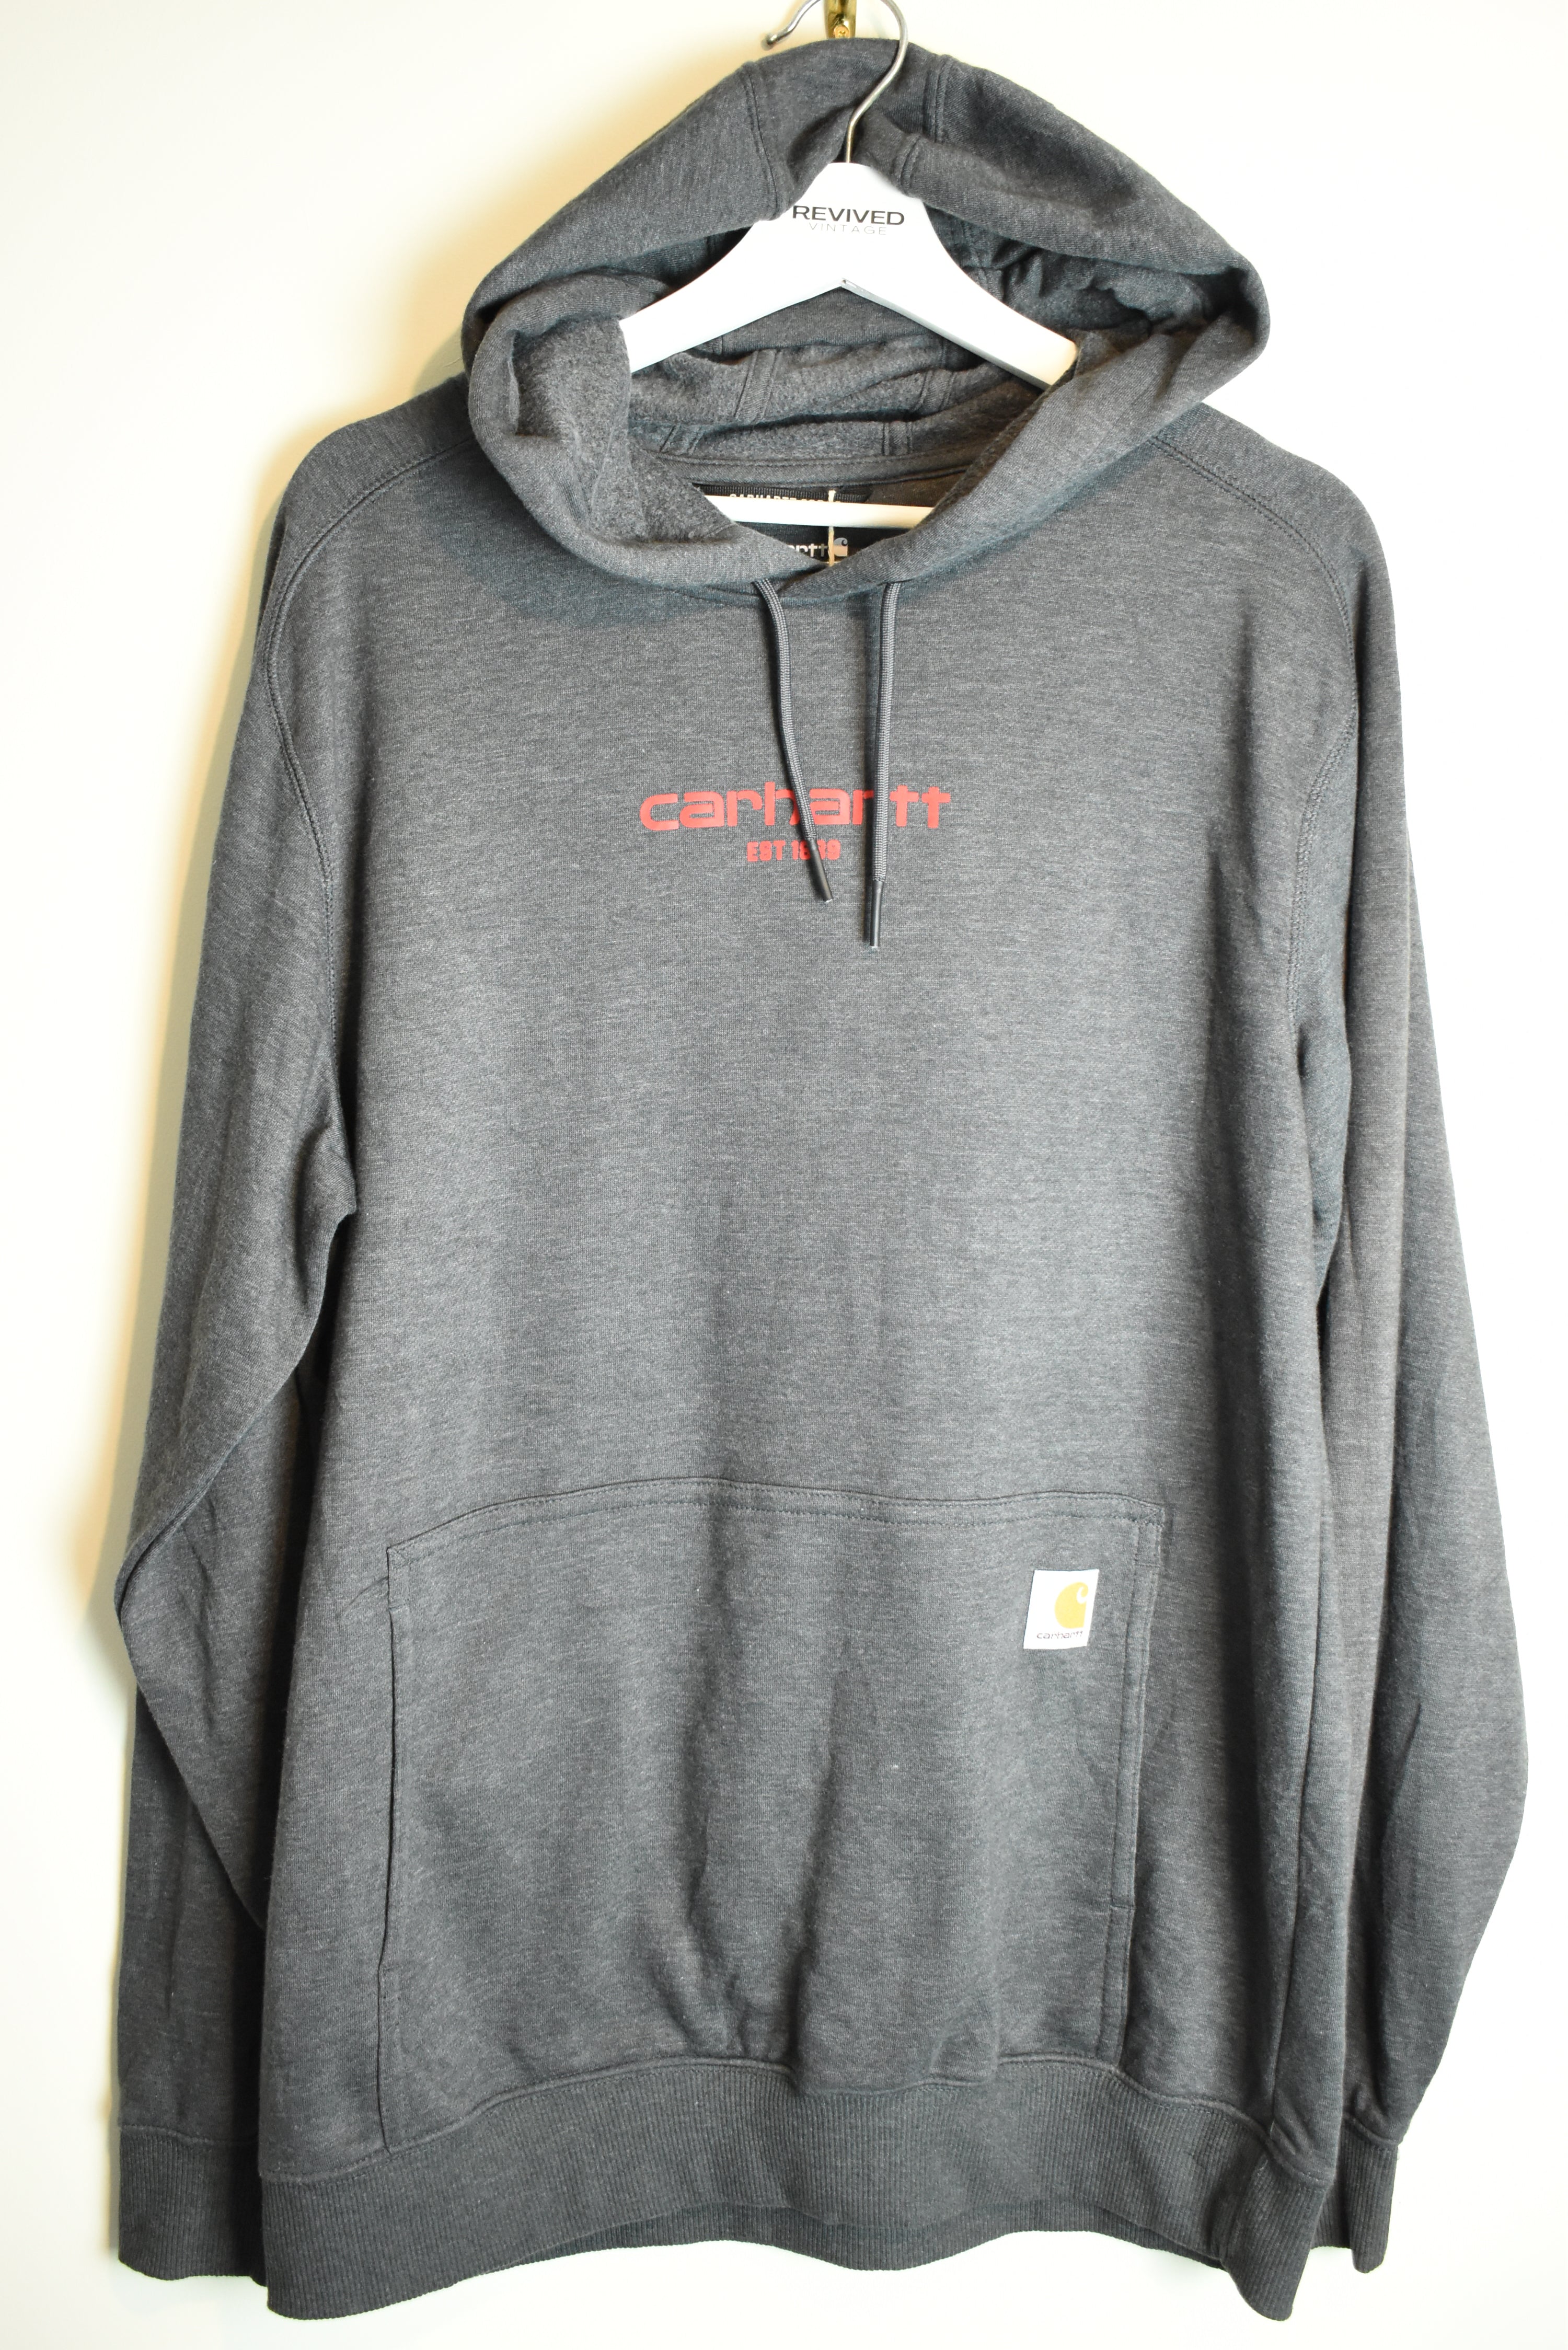 Vintage Carhartt Print Grey Hoodie Relaxed Fit (Carhartt Force) Large